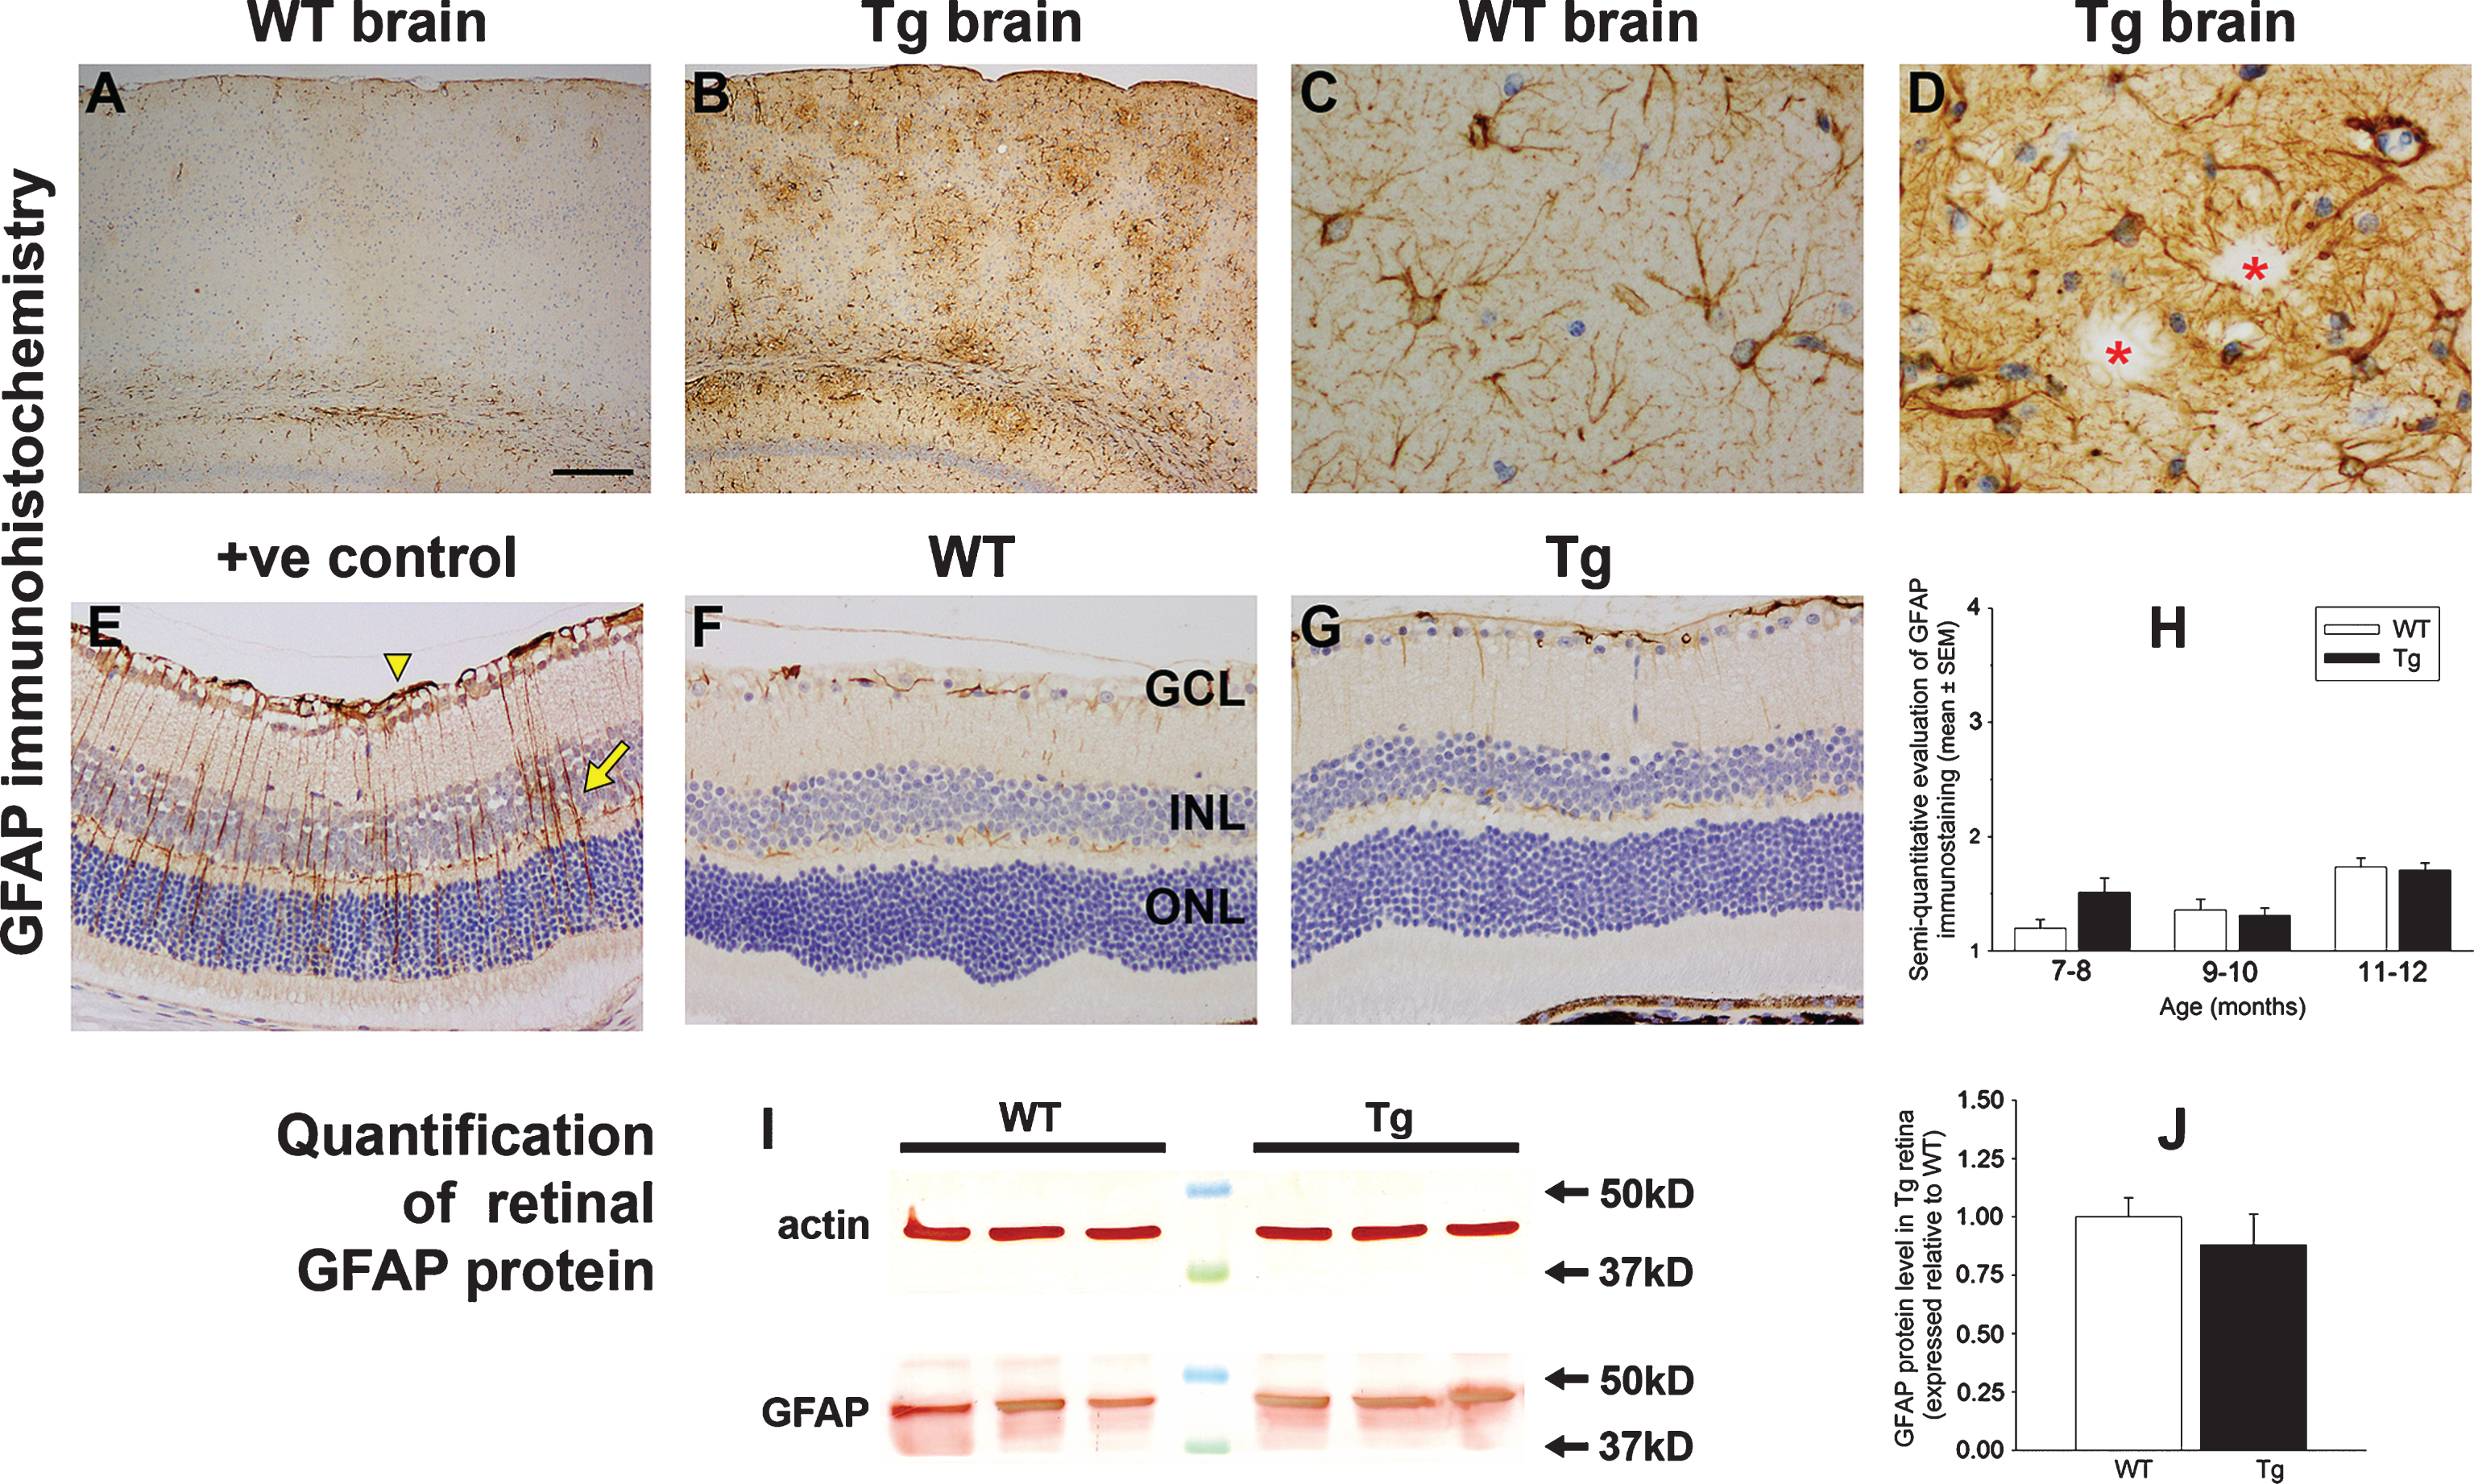 Analysis of GFAP expression in WT and Tg mice. Representative images of GFAP immunolabeling in 11-month-old WT and Tg parietal cortex (A, B) and hippocampus (C, D). In Tg brains, numerous GFAP-positive astrocytes are evident surrounding amyloid plaques, signified by red asterisks. E-G) Representative images of GFAP labeling in a retina subjected to branch retinal vein occlusion (BRVO, +ve control), and in 12-month-old WT and Tg retinas. GFAP immunoreactivity is chiefly restricted to astrocytes in the retinas of WT and Tg mice. In contrast, four days after BRVO, a substantial upregulation of GFAP is evident both in astrocytes (arrowhead) and Müller cells (arrow). Note: the area of retina shown is adjacent to the vein occlusion site and not directly affected. H) Semi-quantification evaluation of GFAP grade in WT and Tg retinas. Data are expressed as mean±SEM, where n = 10 for each age-matched group. Mann-Whitney test revealed no significant differences between the treatment groups. Scale bar: A, B = 250 μm; C, D = 25 μm; E-G = 50 μm. GCL, ganglion cell layer; INL, inner nuclear layer; ONL, outer nuclear layer. I, J) Expression of GFAP protein in 11–12-month-old WT and Tg retinas as evaluated by western immunoblotting. A single band of the expected molecular weight is apparent. Data (expressed as mean±SEM, where n = 10) are normalized for actin and expressed relative to WT. Student’s unpaired t-test revealed no significant difference between the treatment groups.